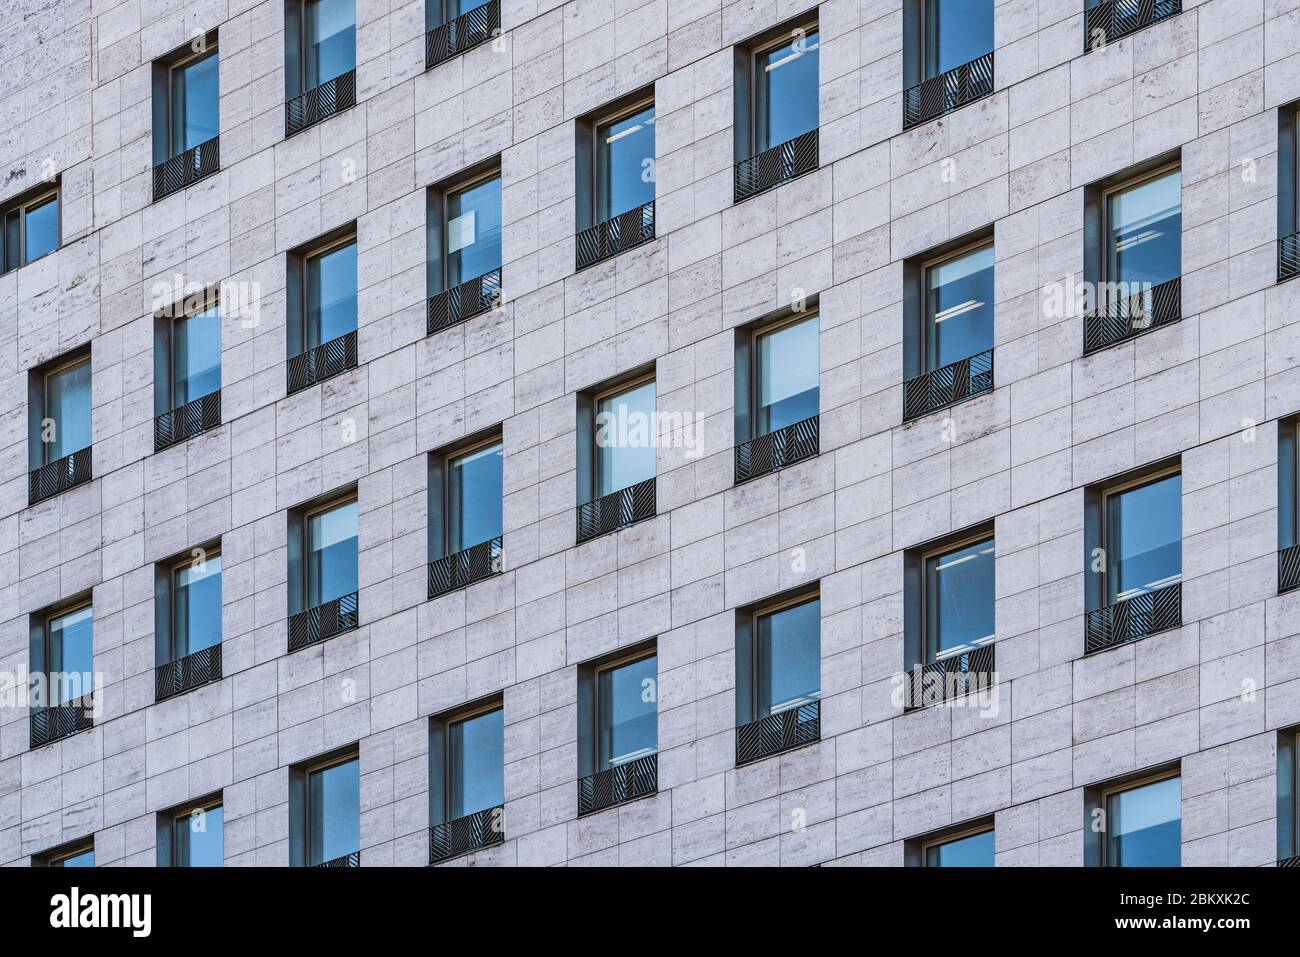 Rows of windows of a business building built in roman travertine marble Stock Photo